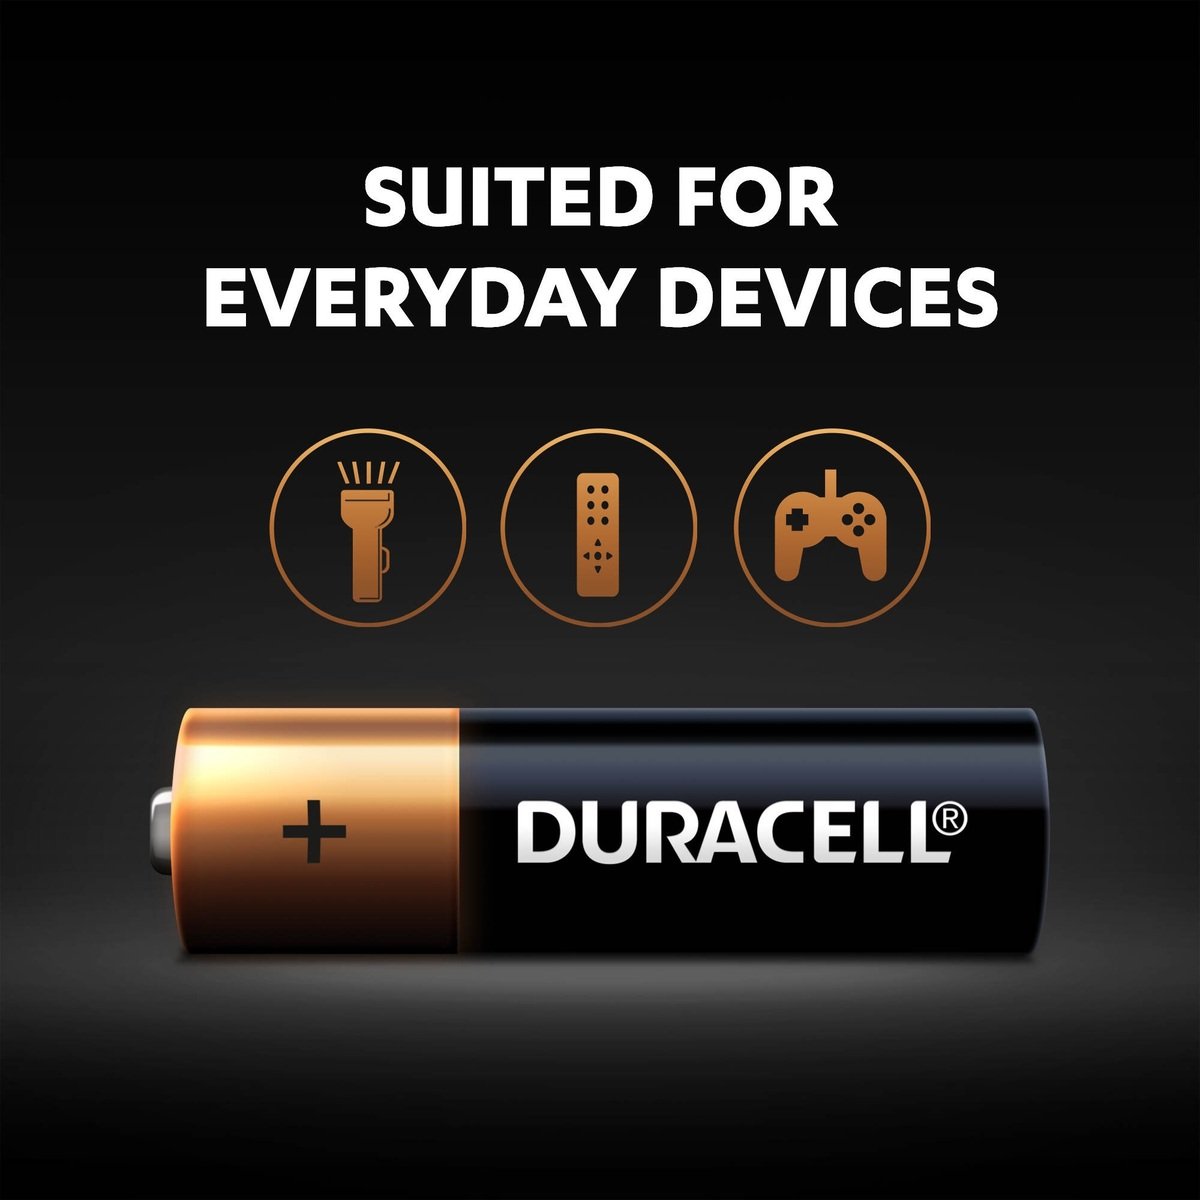 Duracell Type AAA Alkaline Batteries 12BL Value Pack of 12